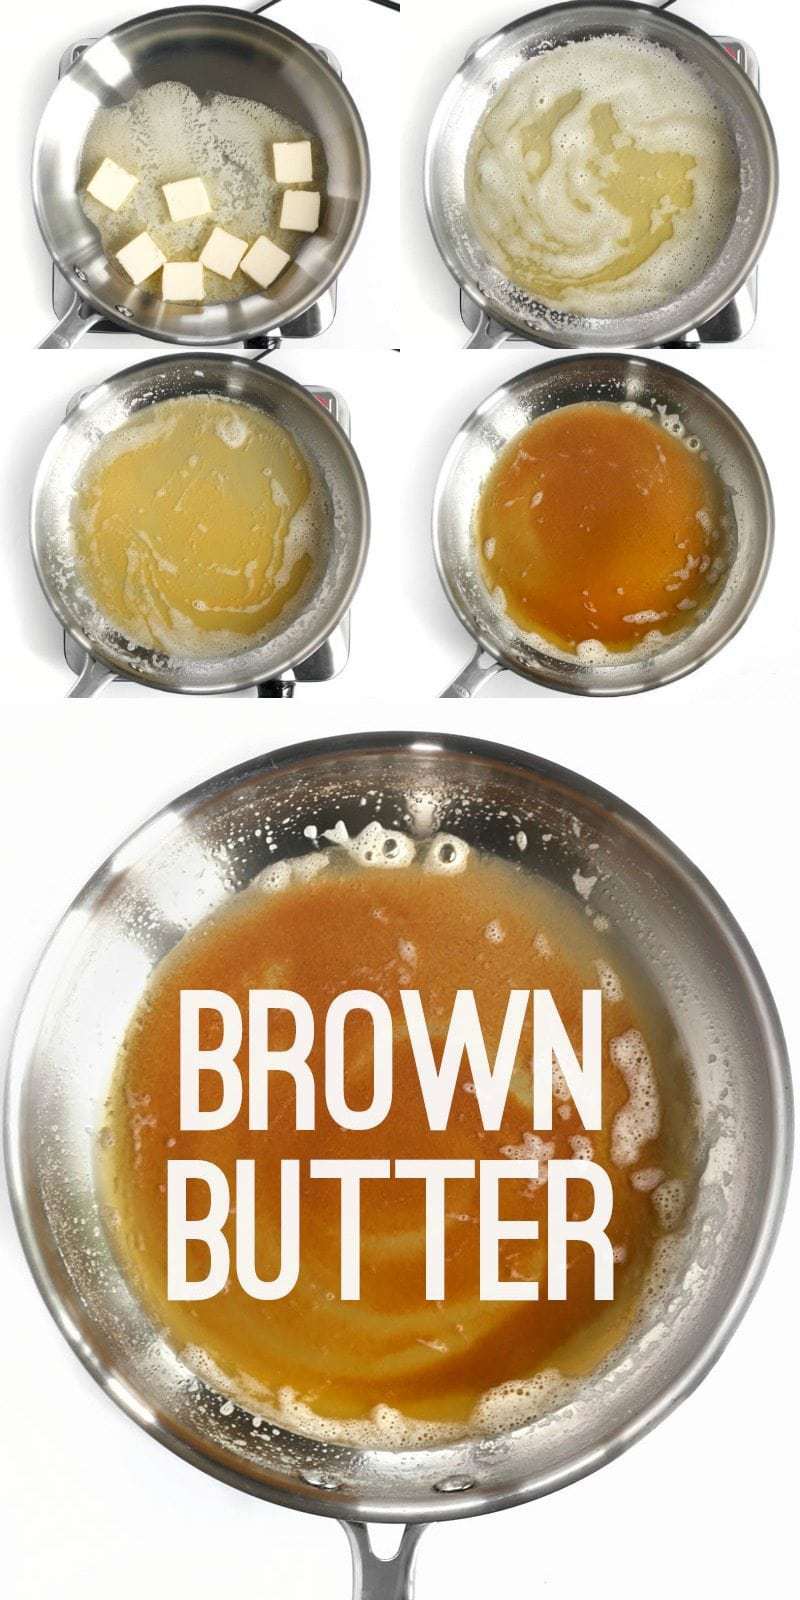 Brown Butter is the liquid gold that makes a recipe pop. Here is a simple step by step tutorial on how to make brown butter. BudgetBytes.com